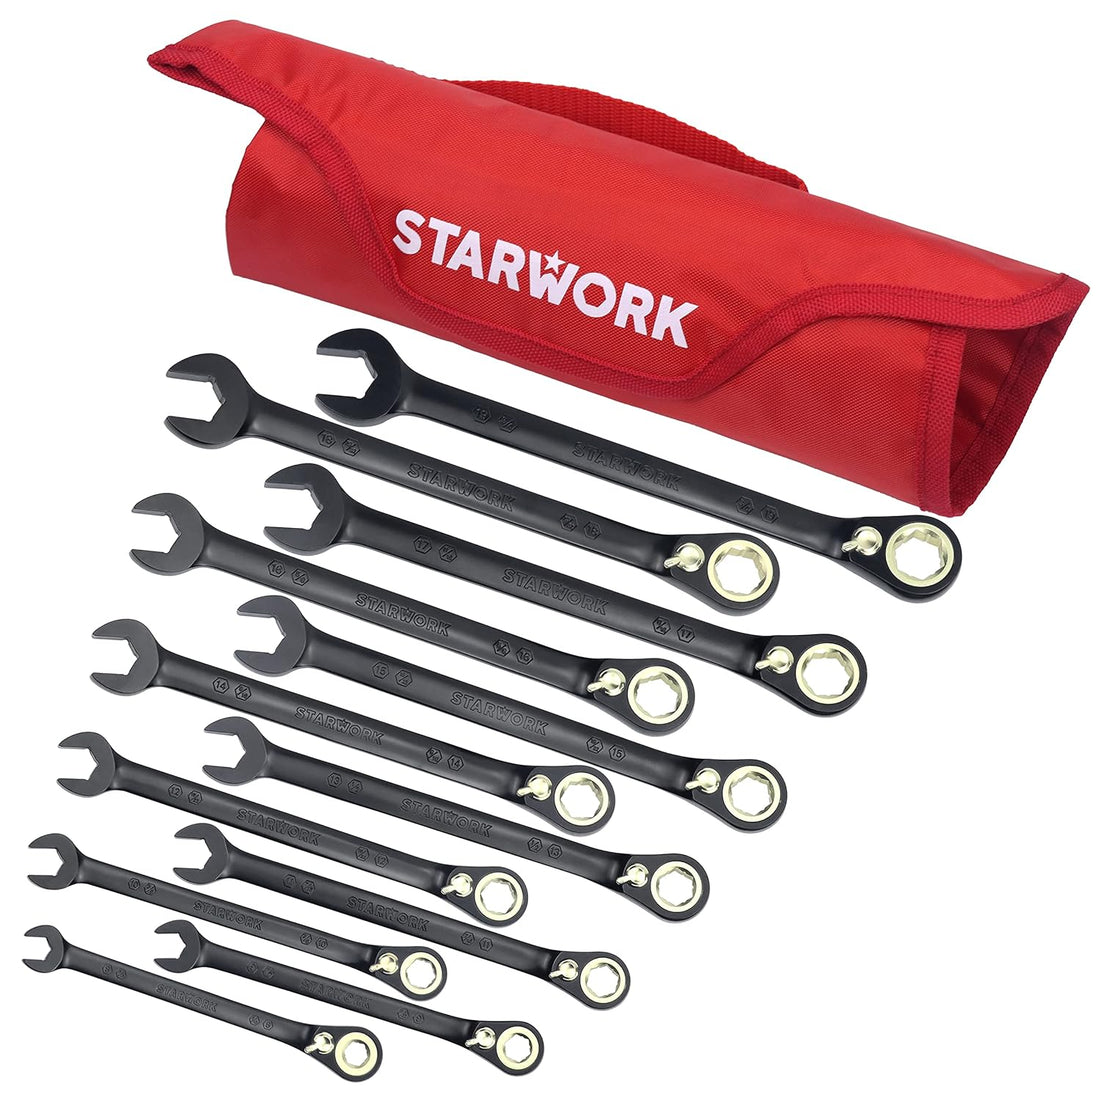 STARWORK TRUE MECHANIC™ 12Pc. 120T Reversible SAE&Metric Ratcheting Wrench Set, Long Pattern, Professional, With Portable Roll-Up Pouch Bag